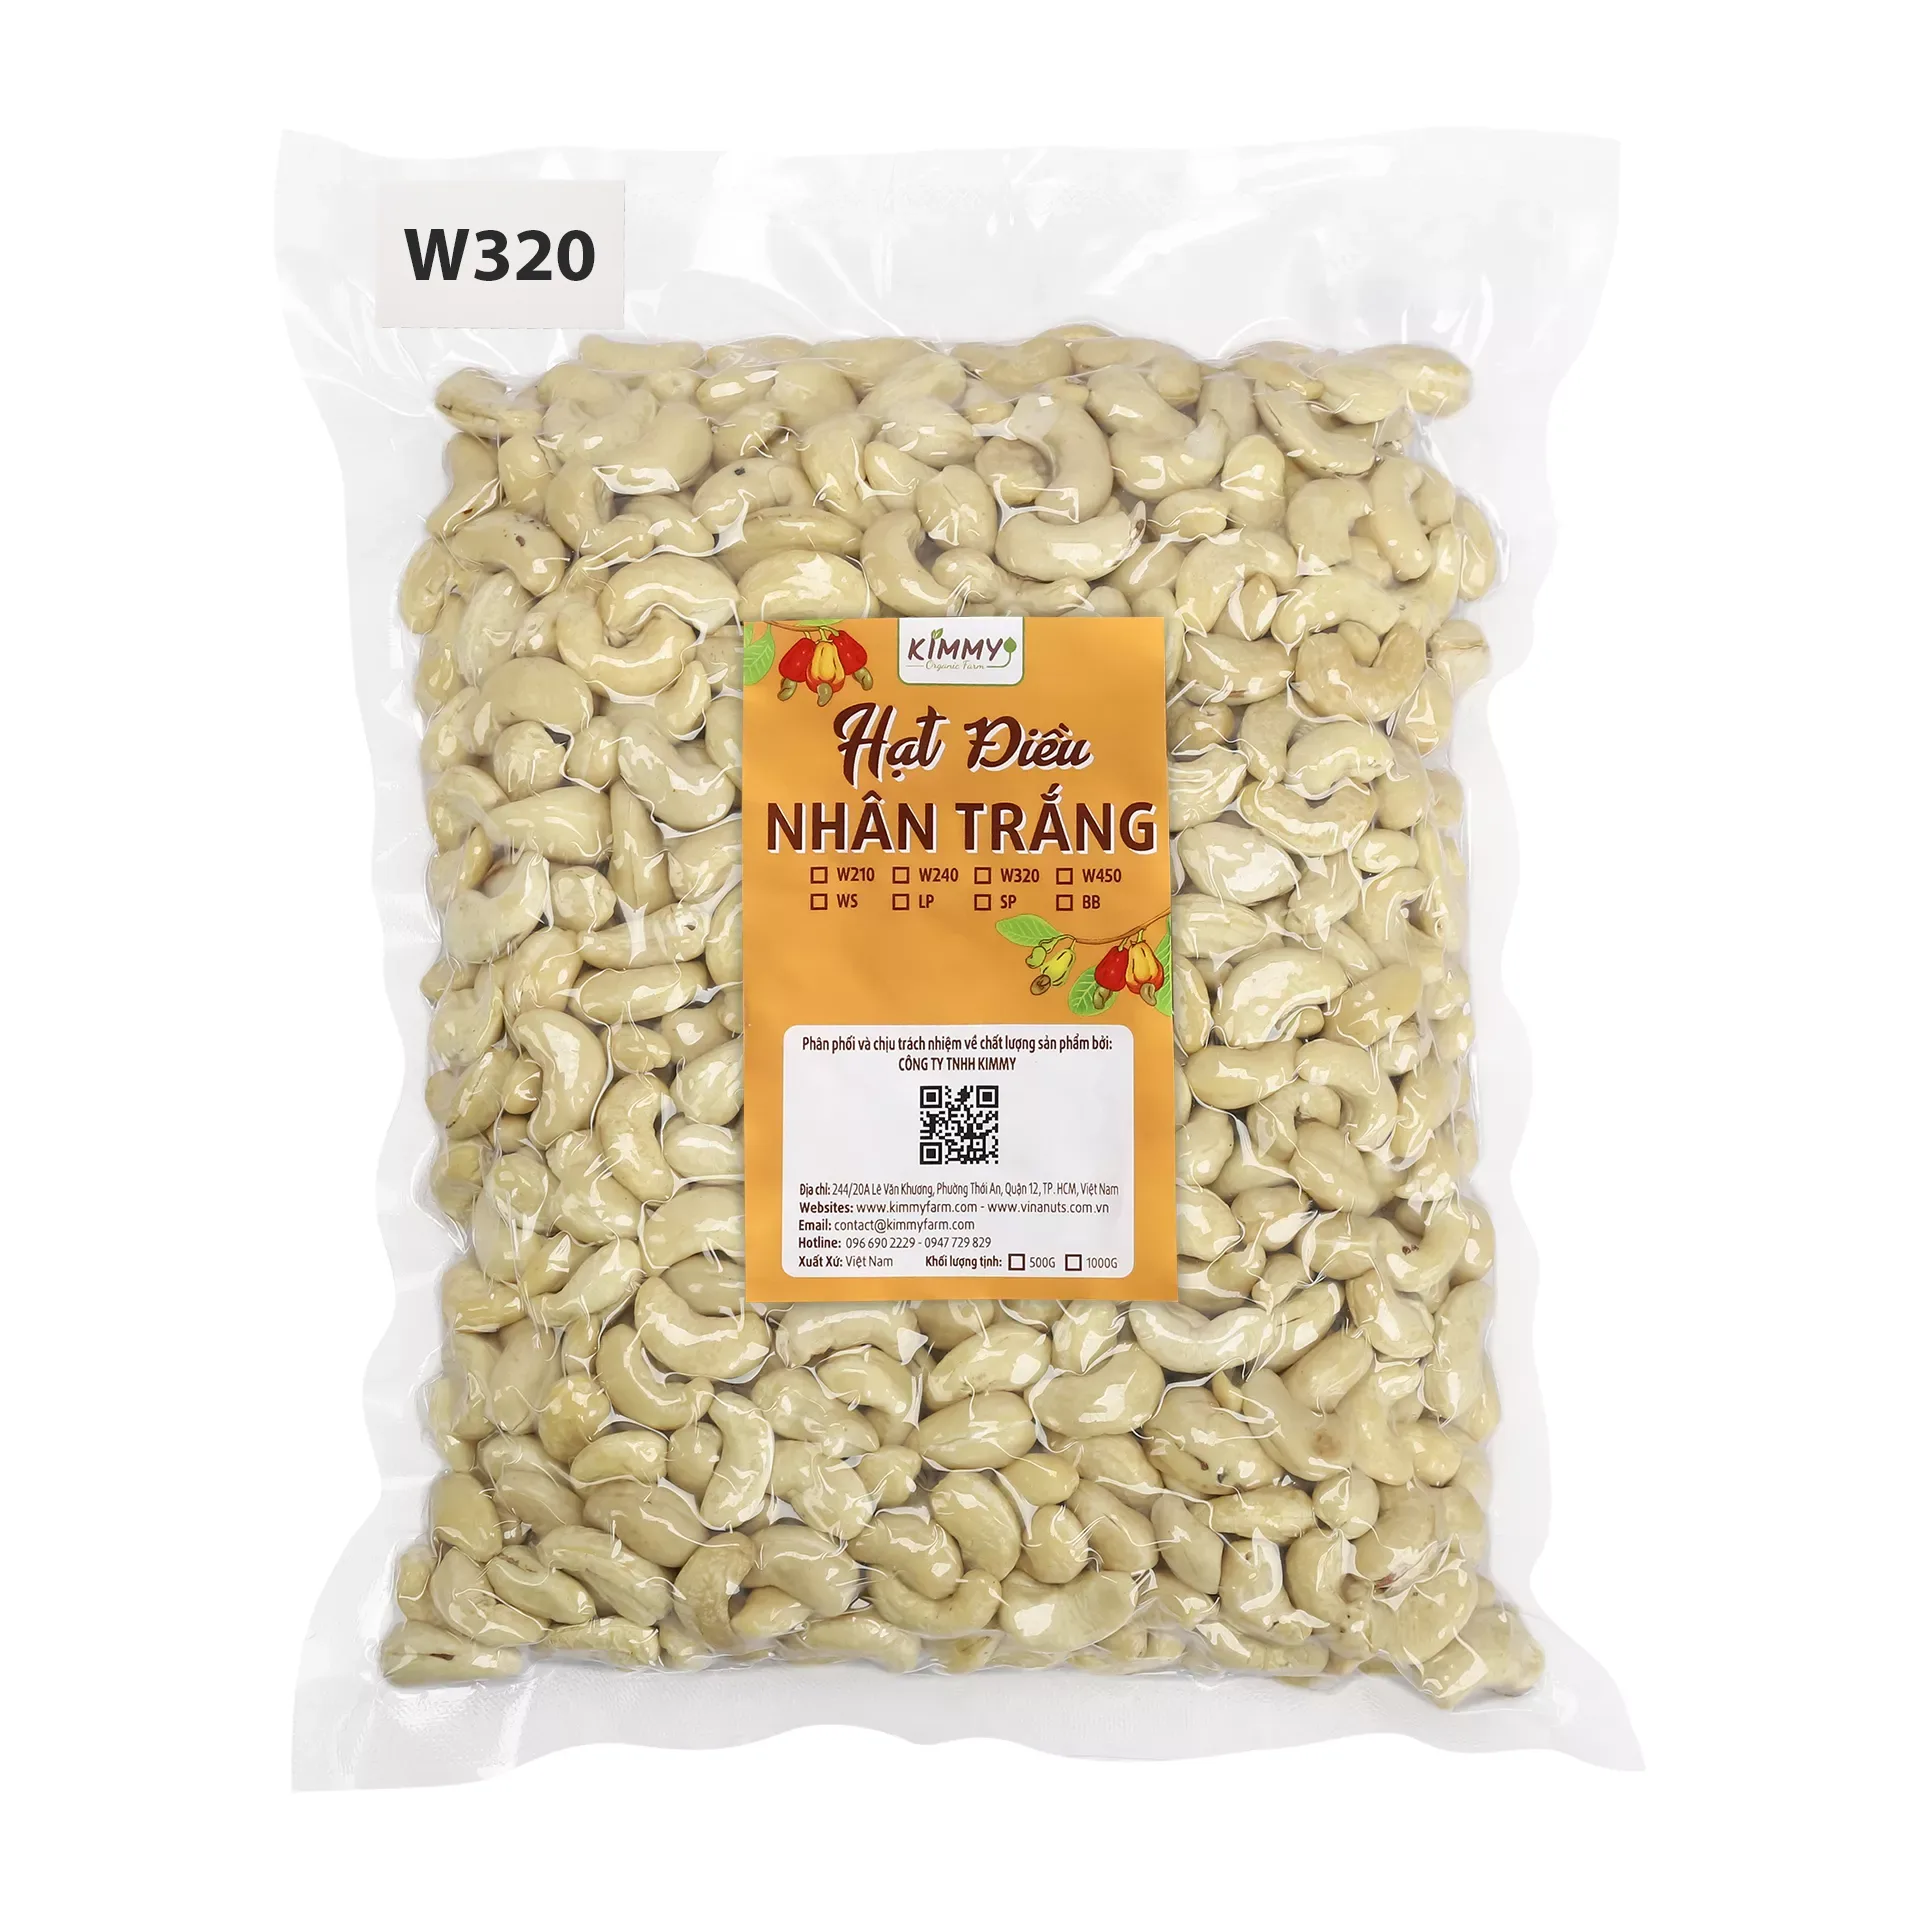 W320 Cashew With 1st Quality - 1KG Packed in Vacuum Bags